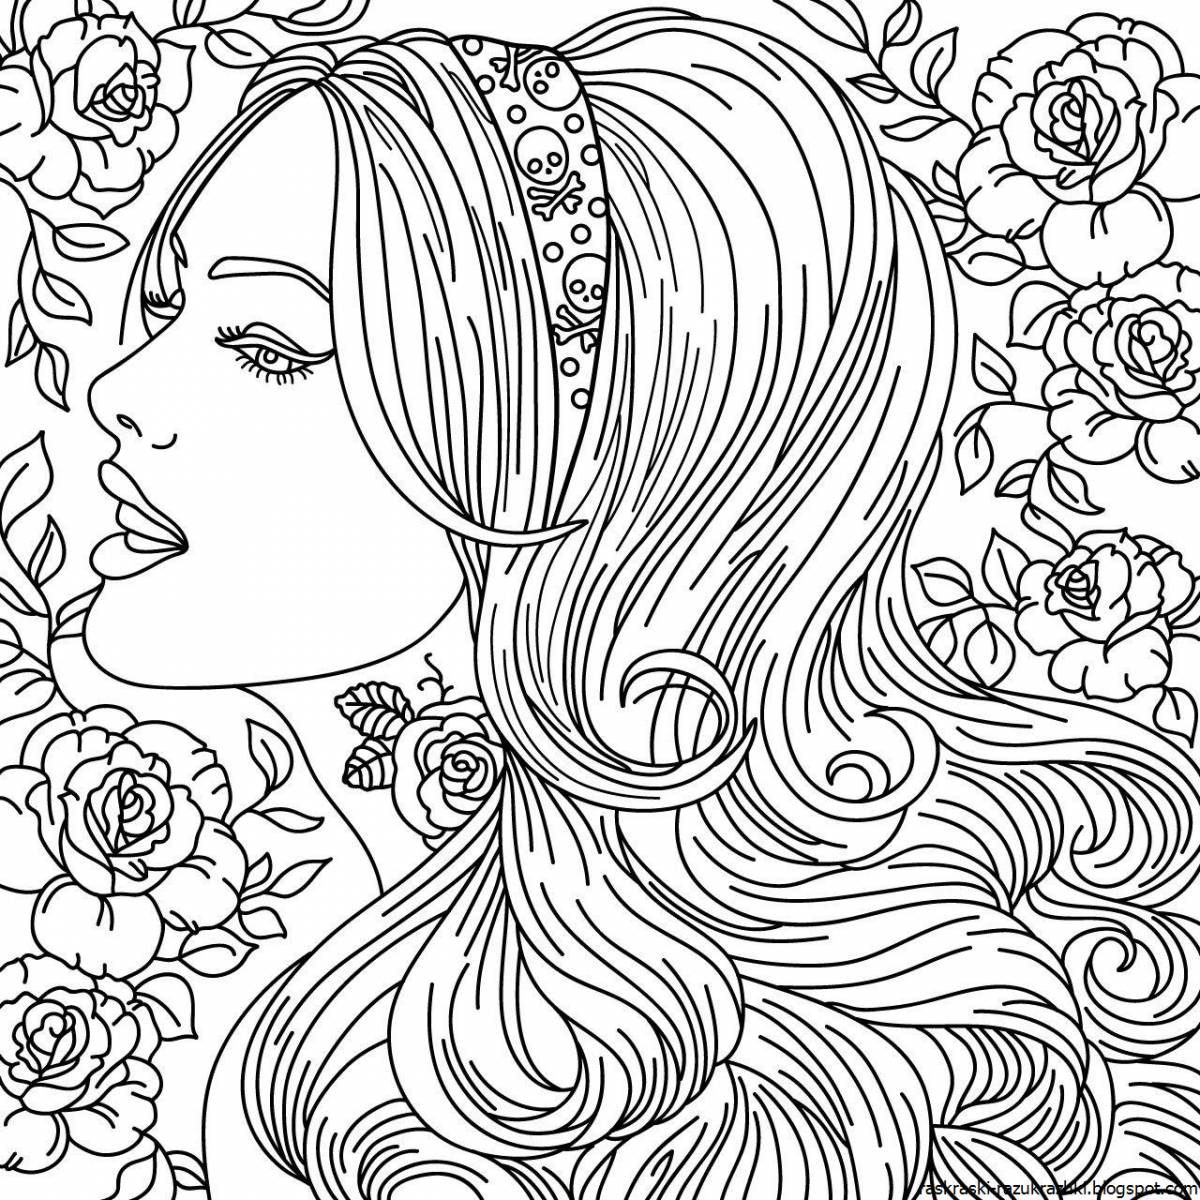 Charming coloring book for 10 years